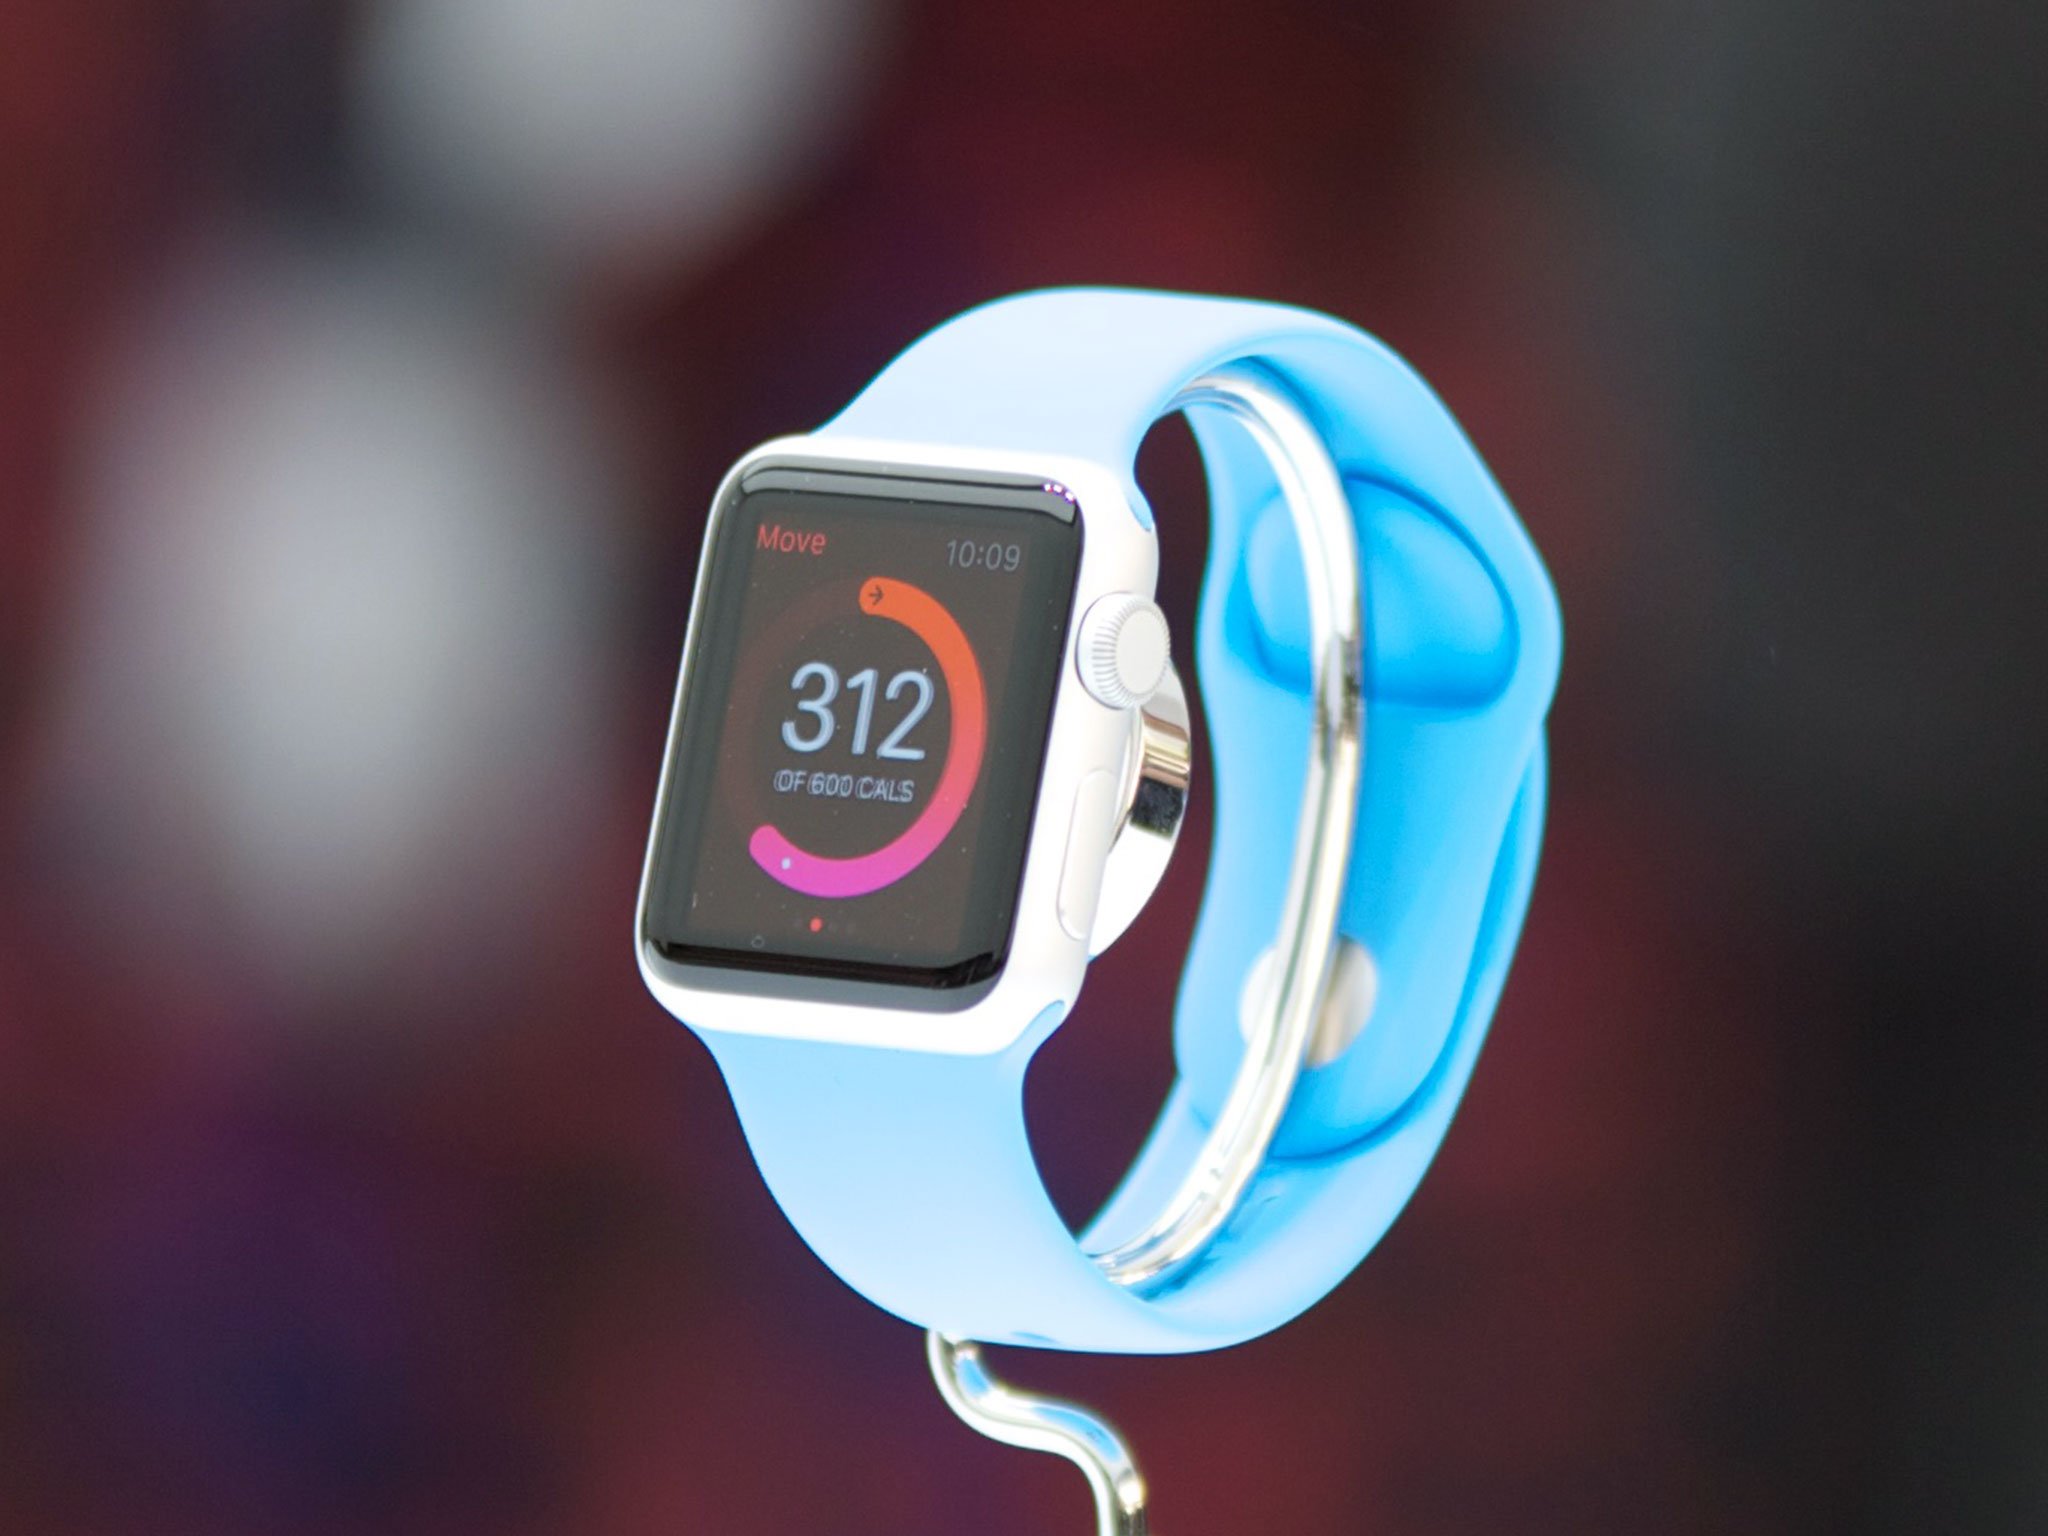 Next generation Apple Watch should appease health fanatics with even more sensors